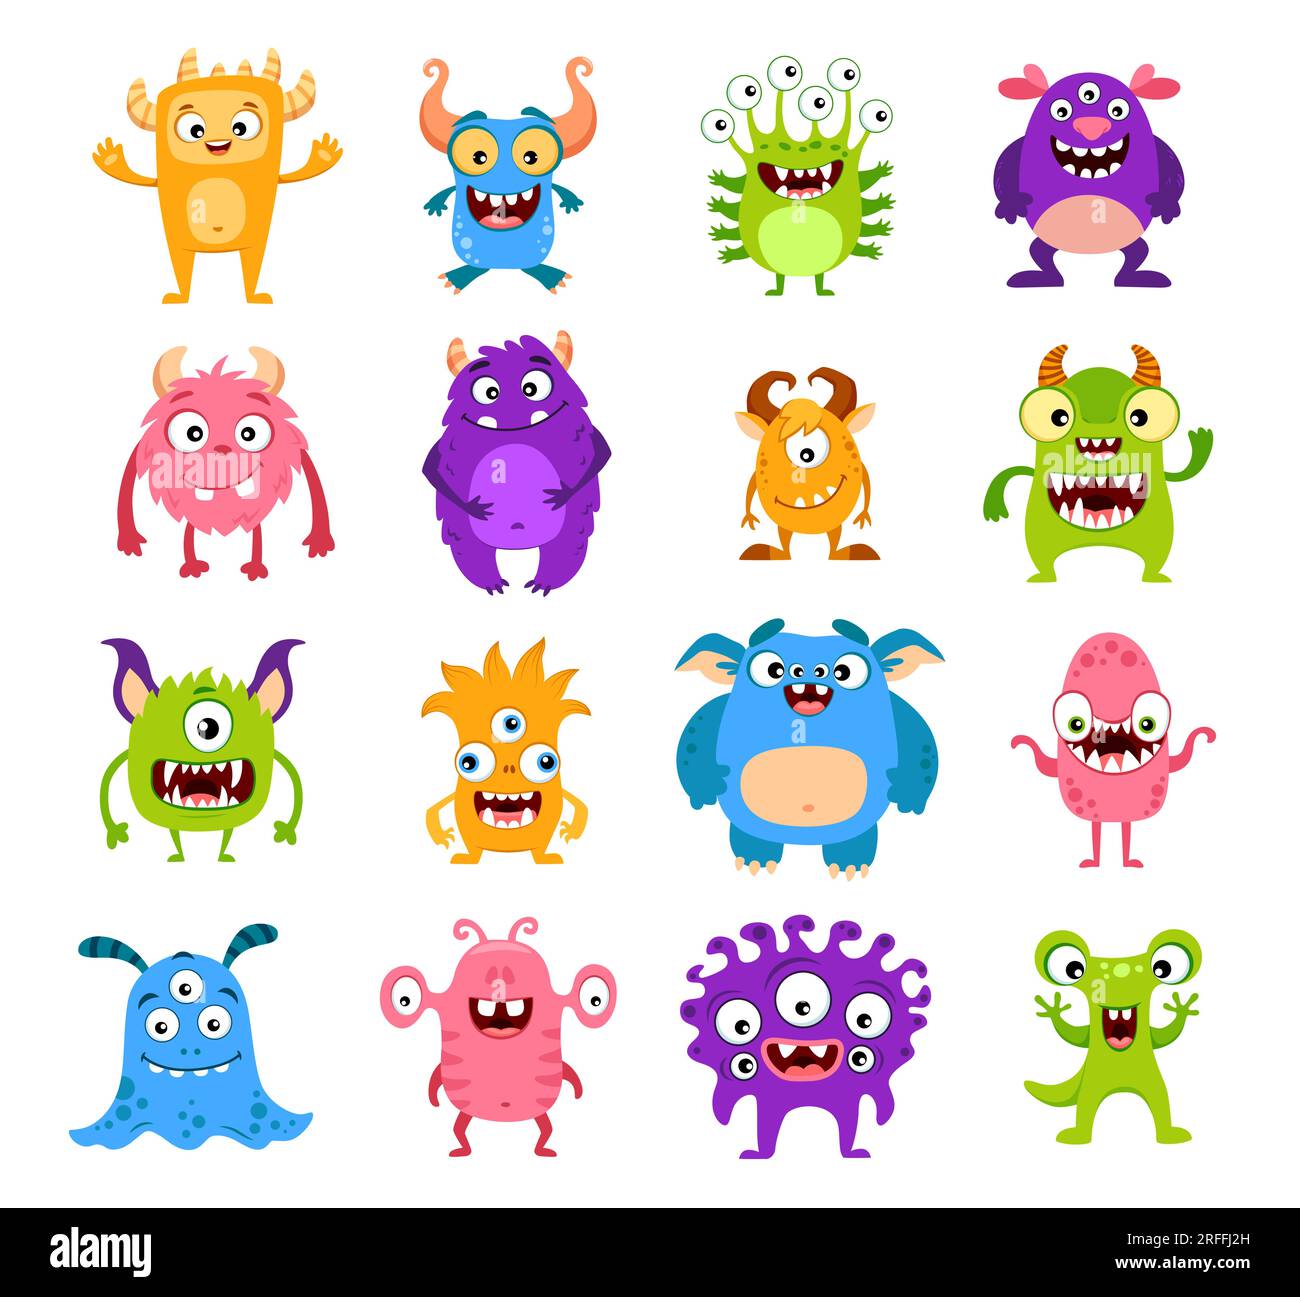 Cartoon funny monster characters. Cute comic creatures isolated vector ...